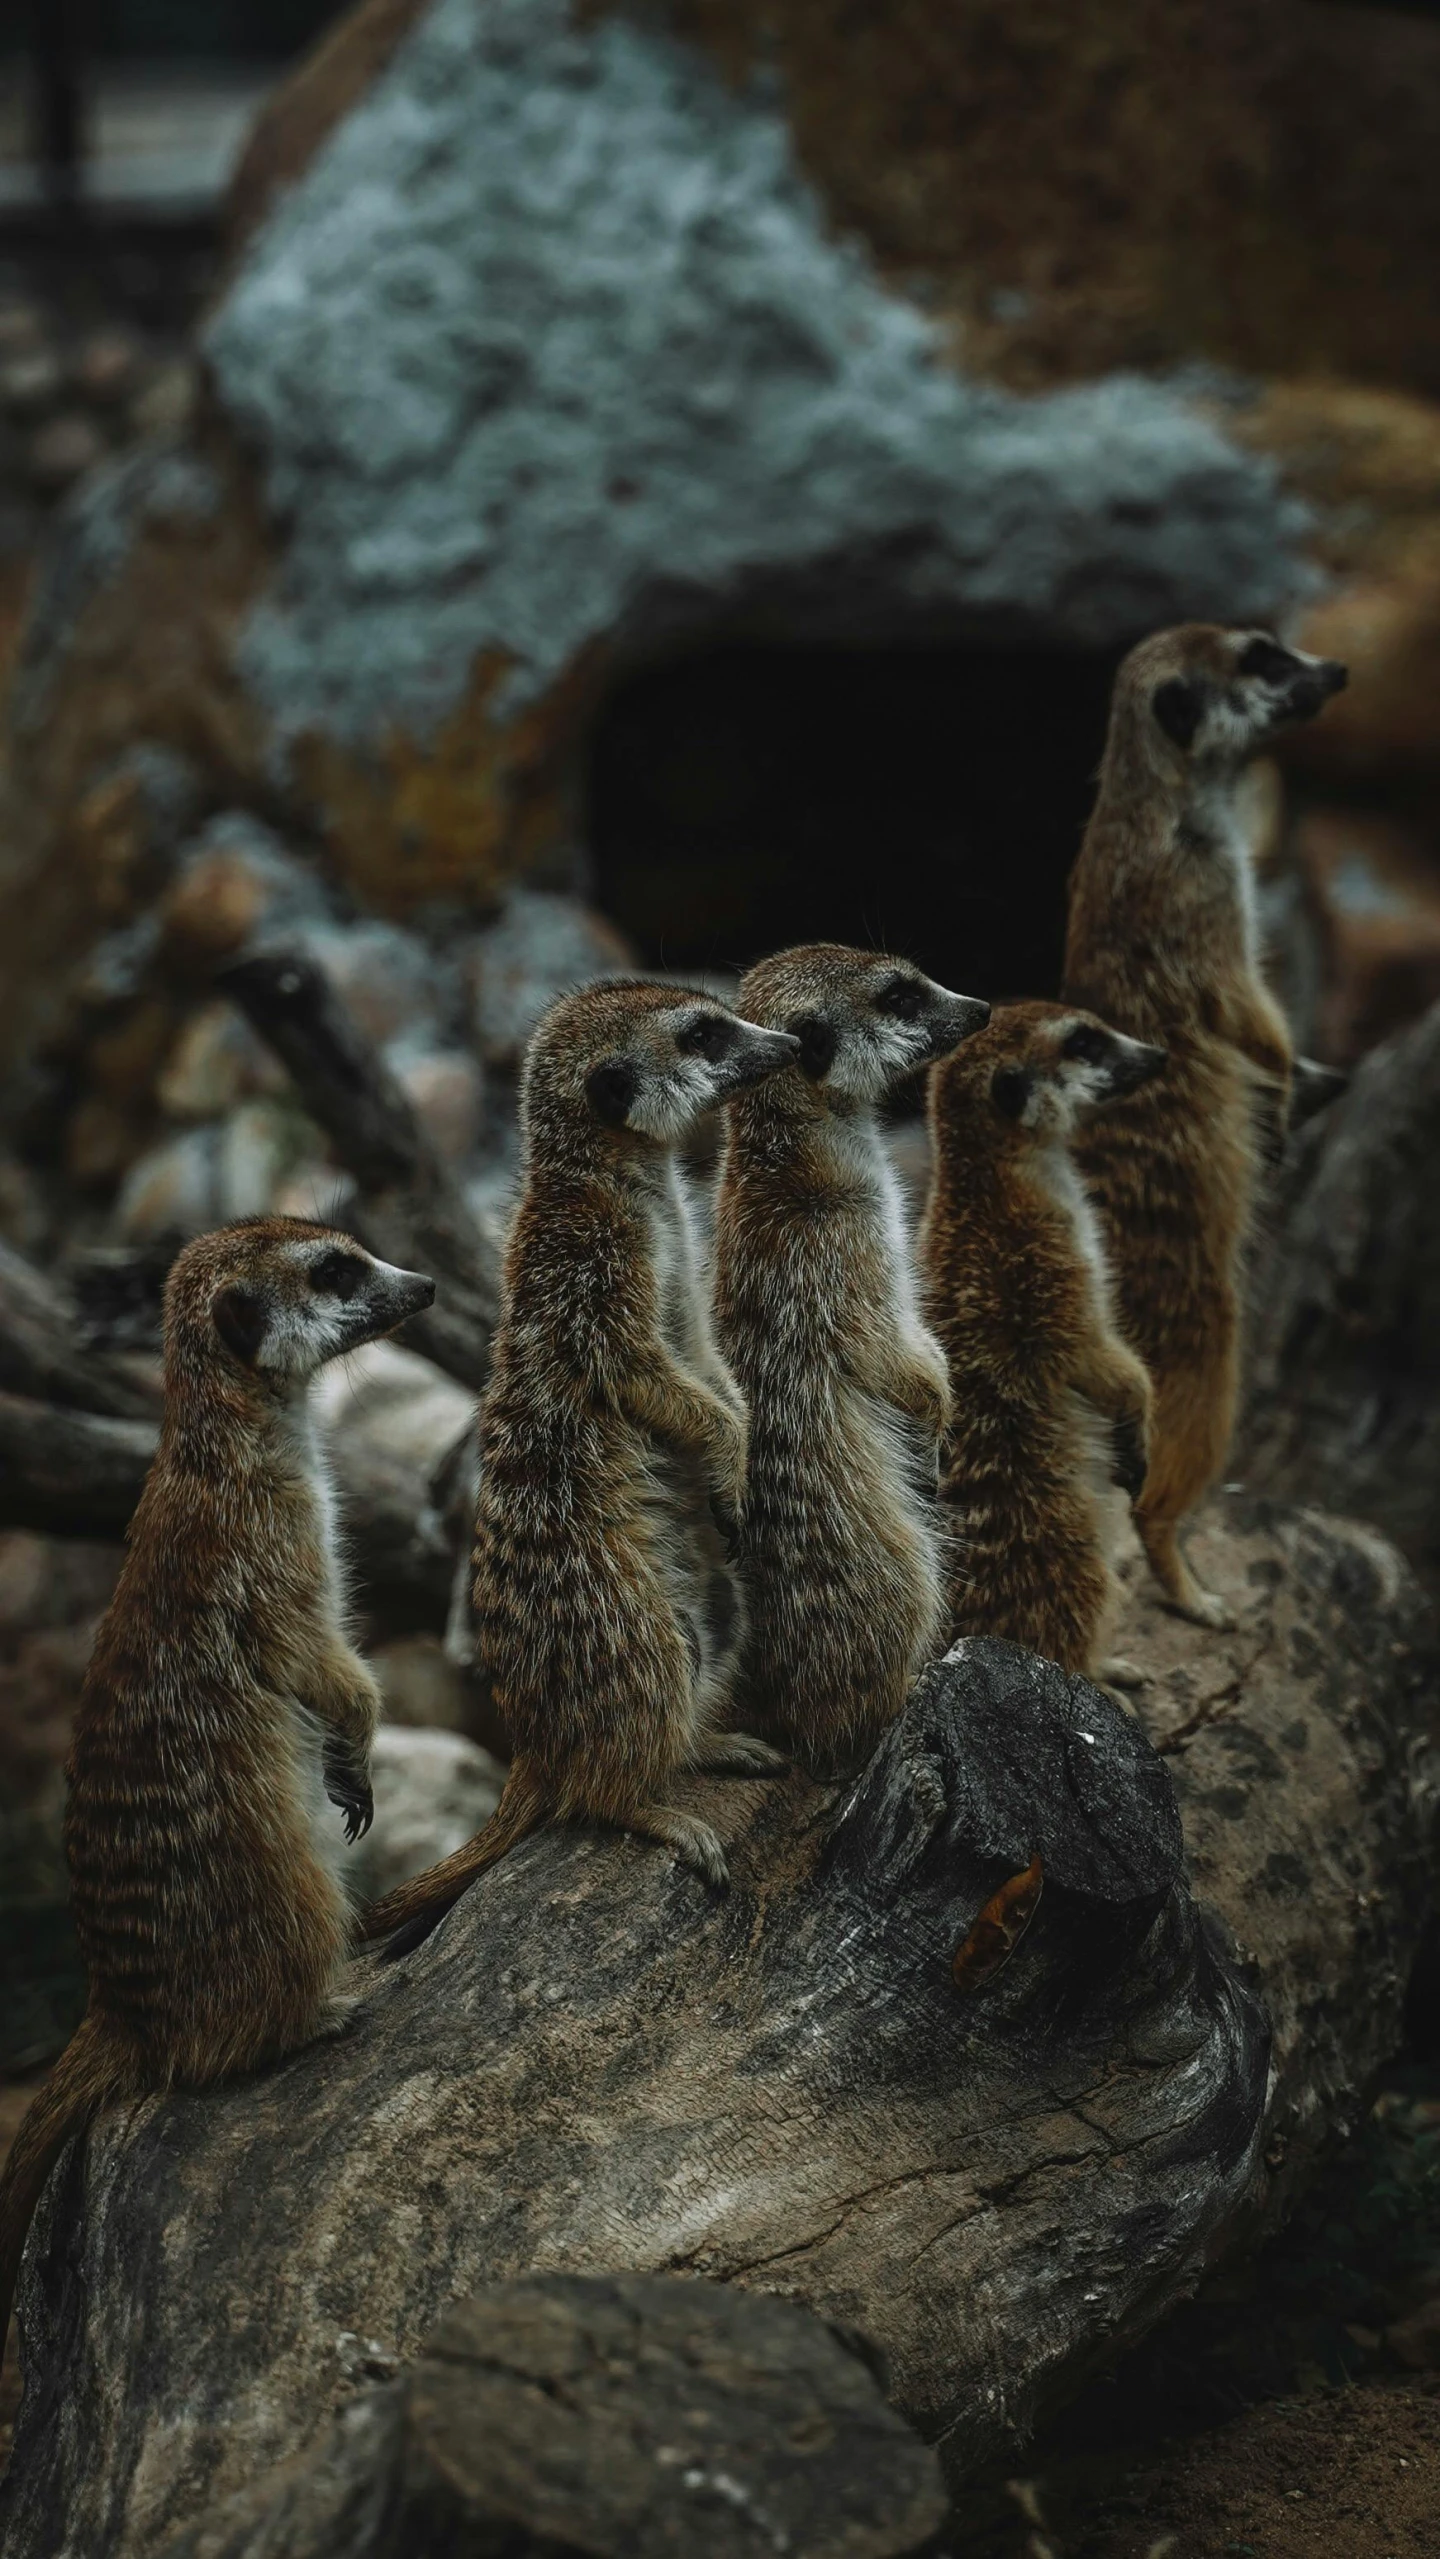 some very cute small meerkats sitting on a rock